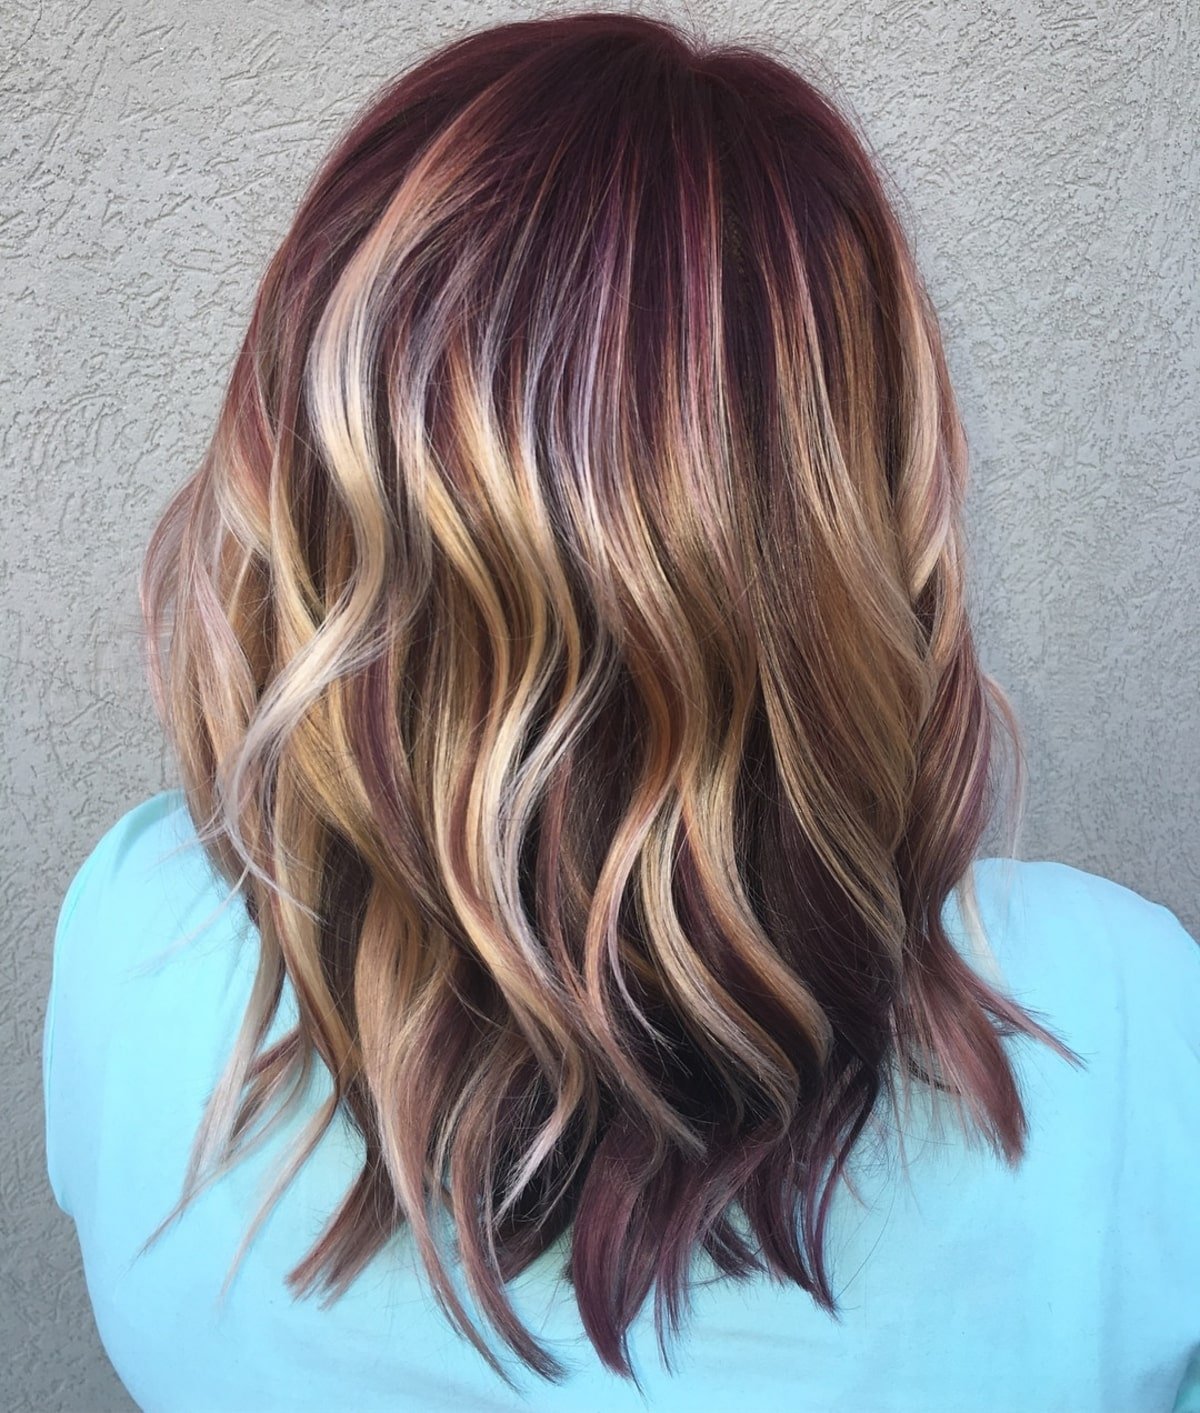 Burgundy Red Hair With Blonde Highlights